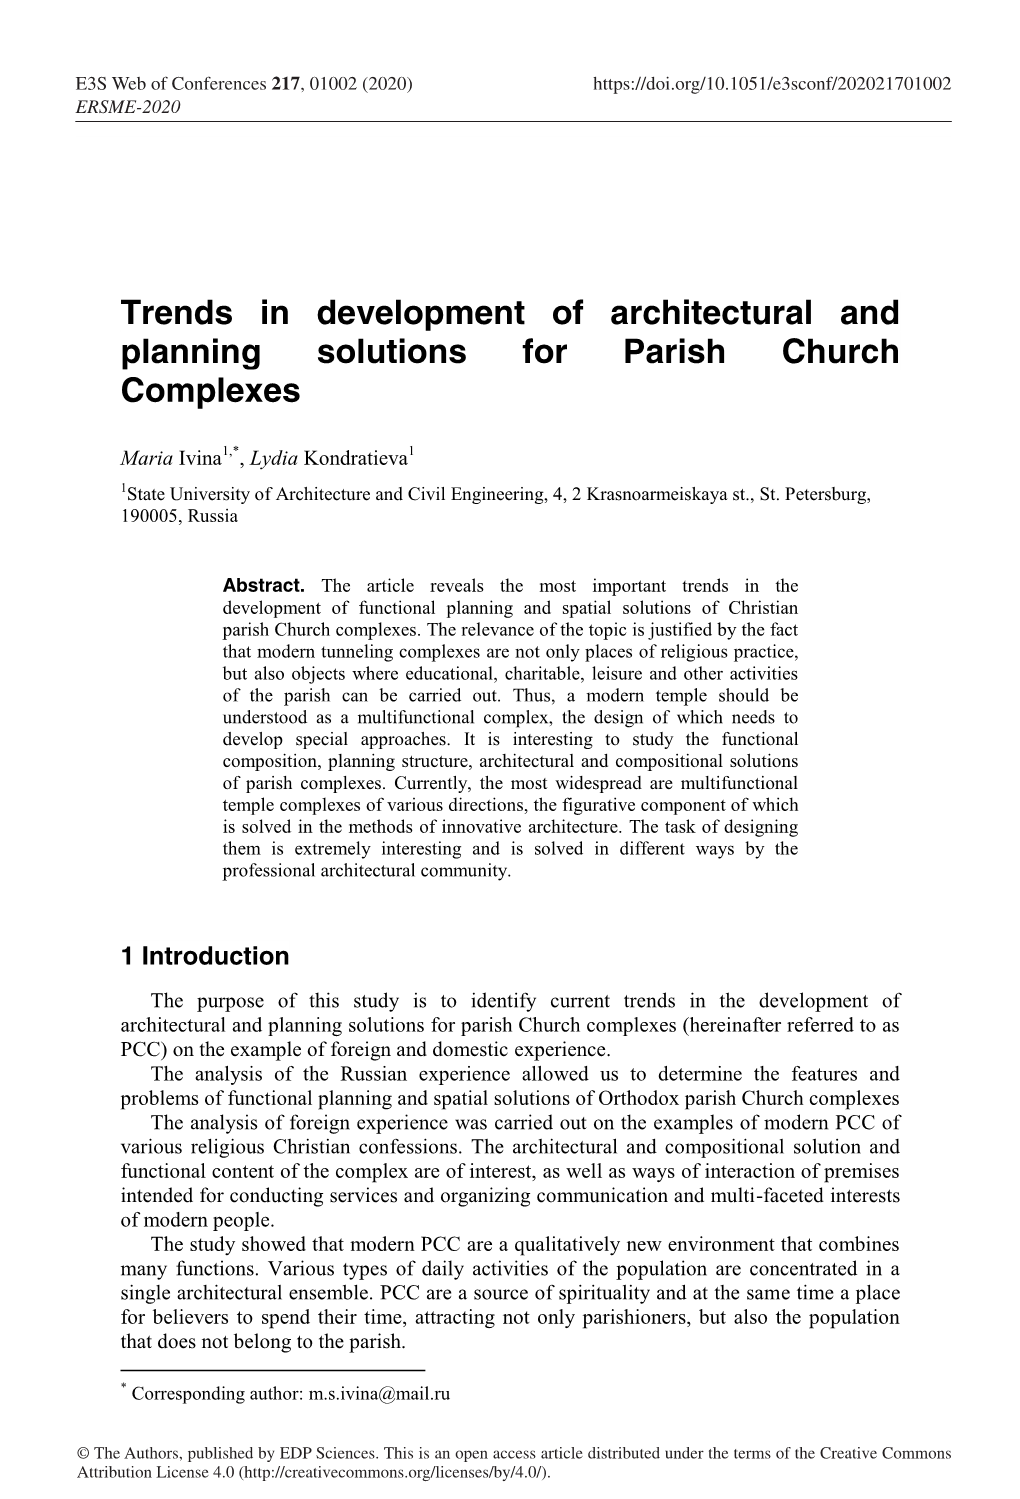 Trends in Development of Architectural and Planning Solutions for Parish Church Complexes